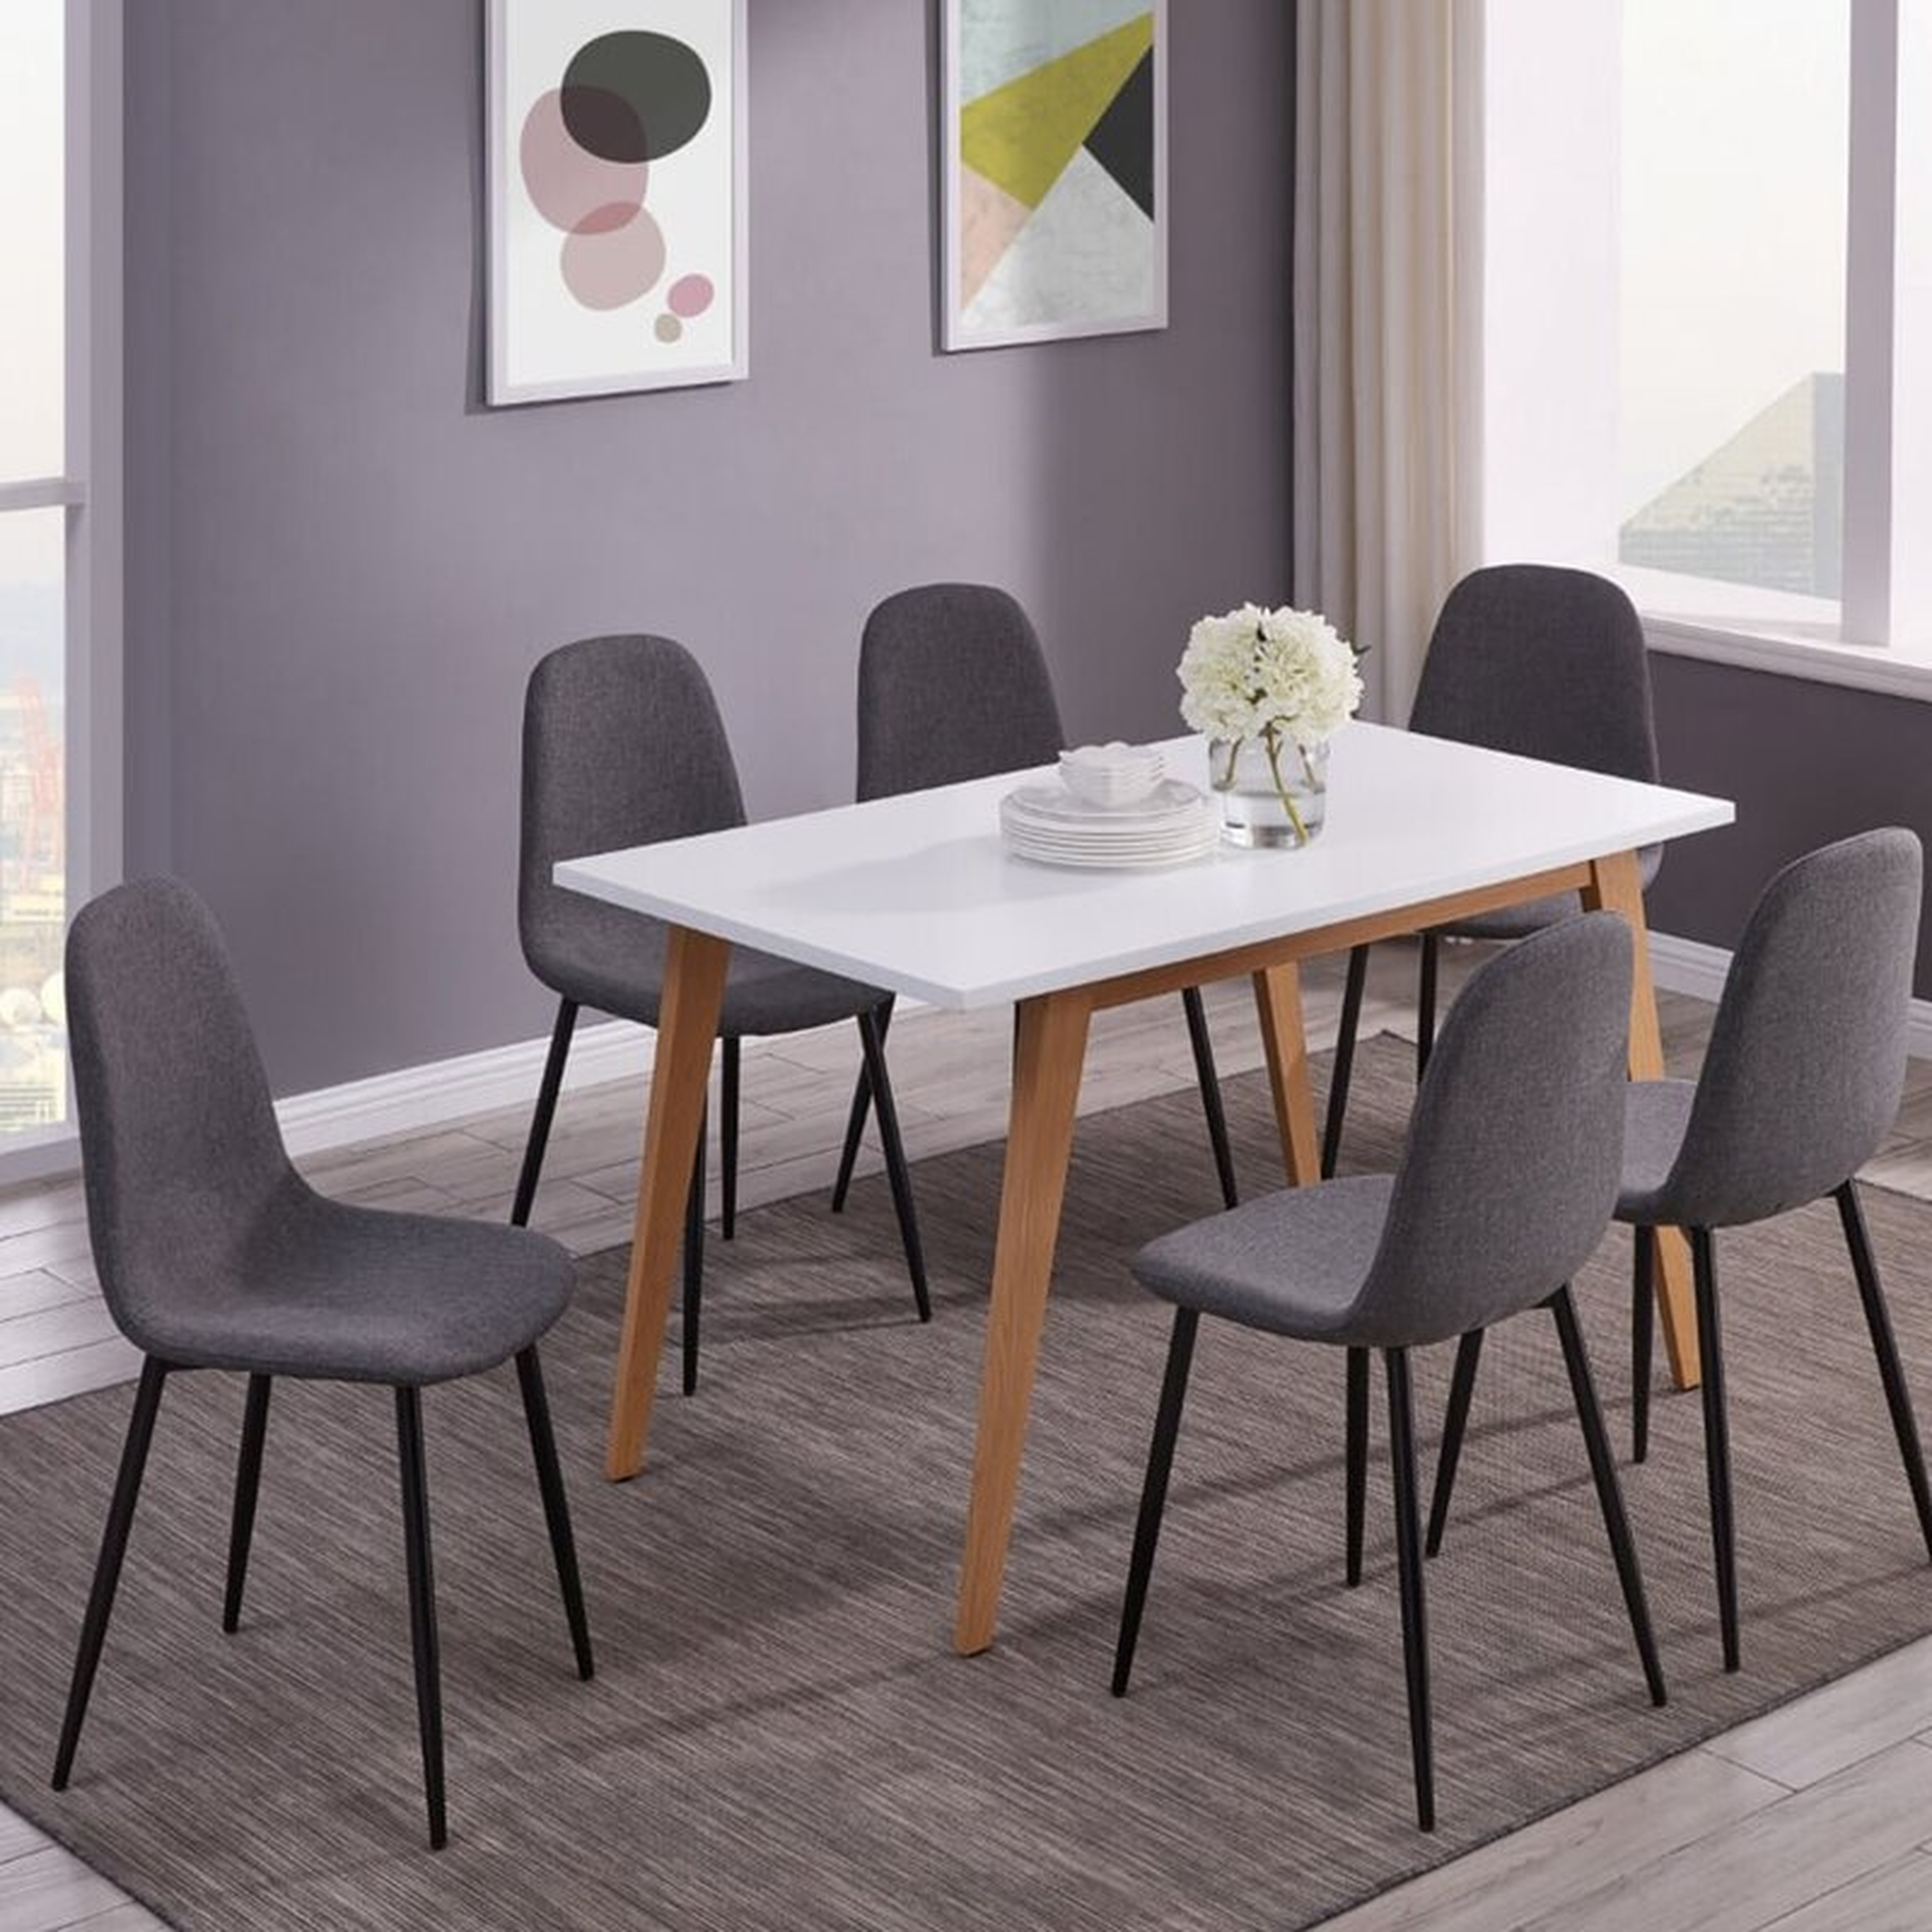 Nick Upholstered Side Chair in Gray (Set of 6) - Wayfair